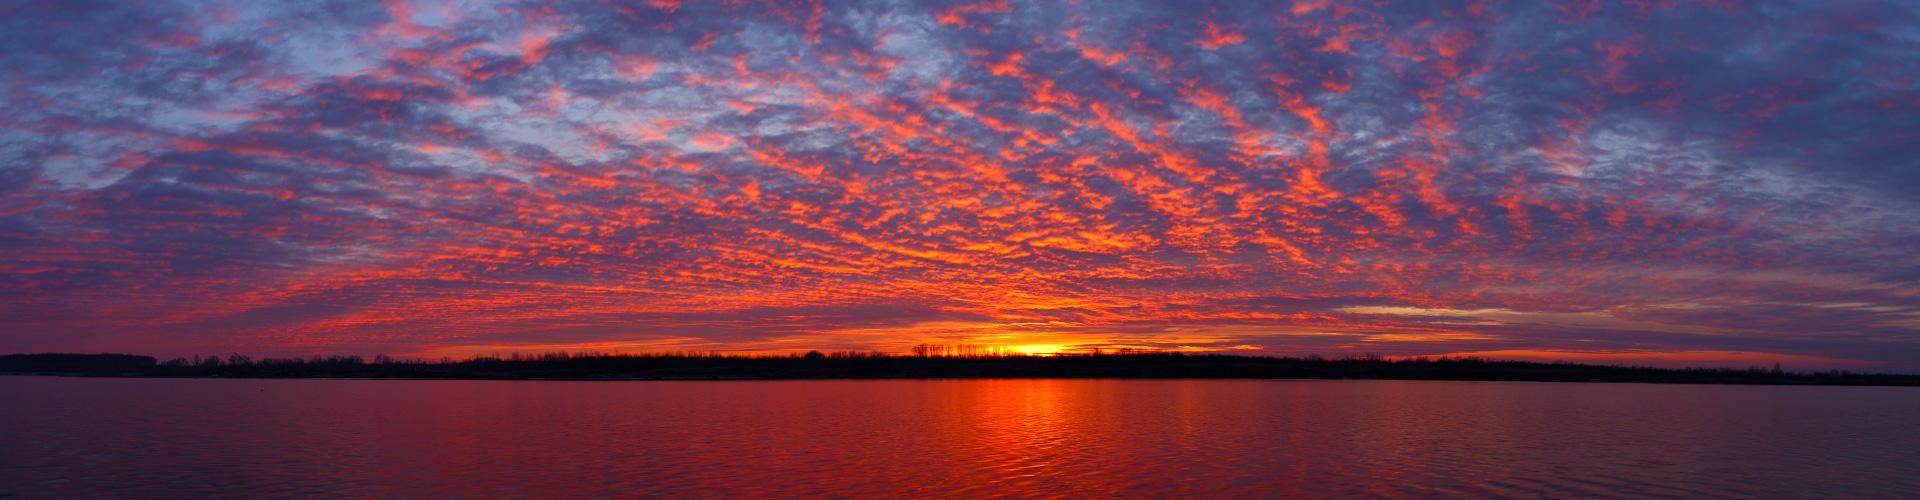 A twilight sky awash with purple, orange and yellow as the sun sets over a lake 